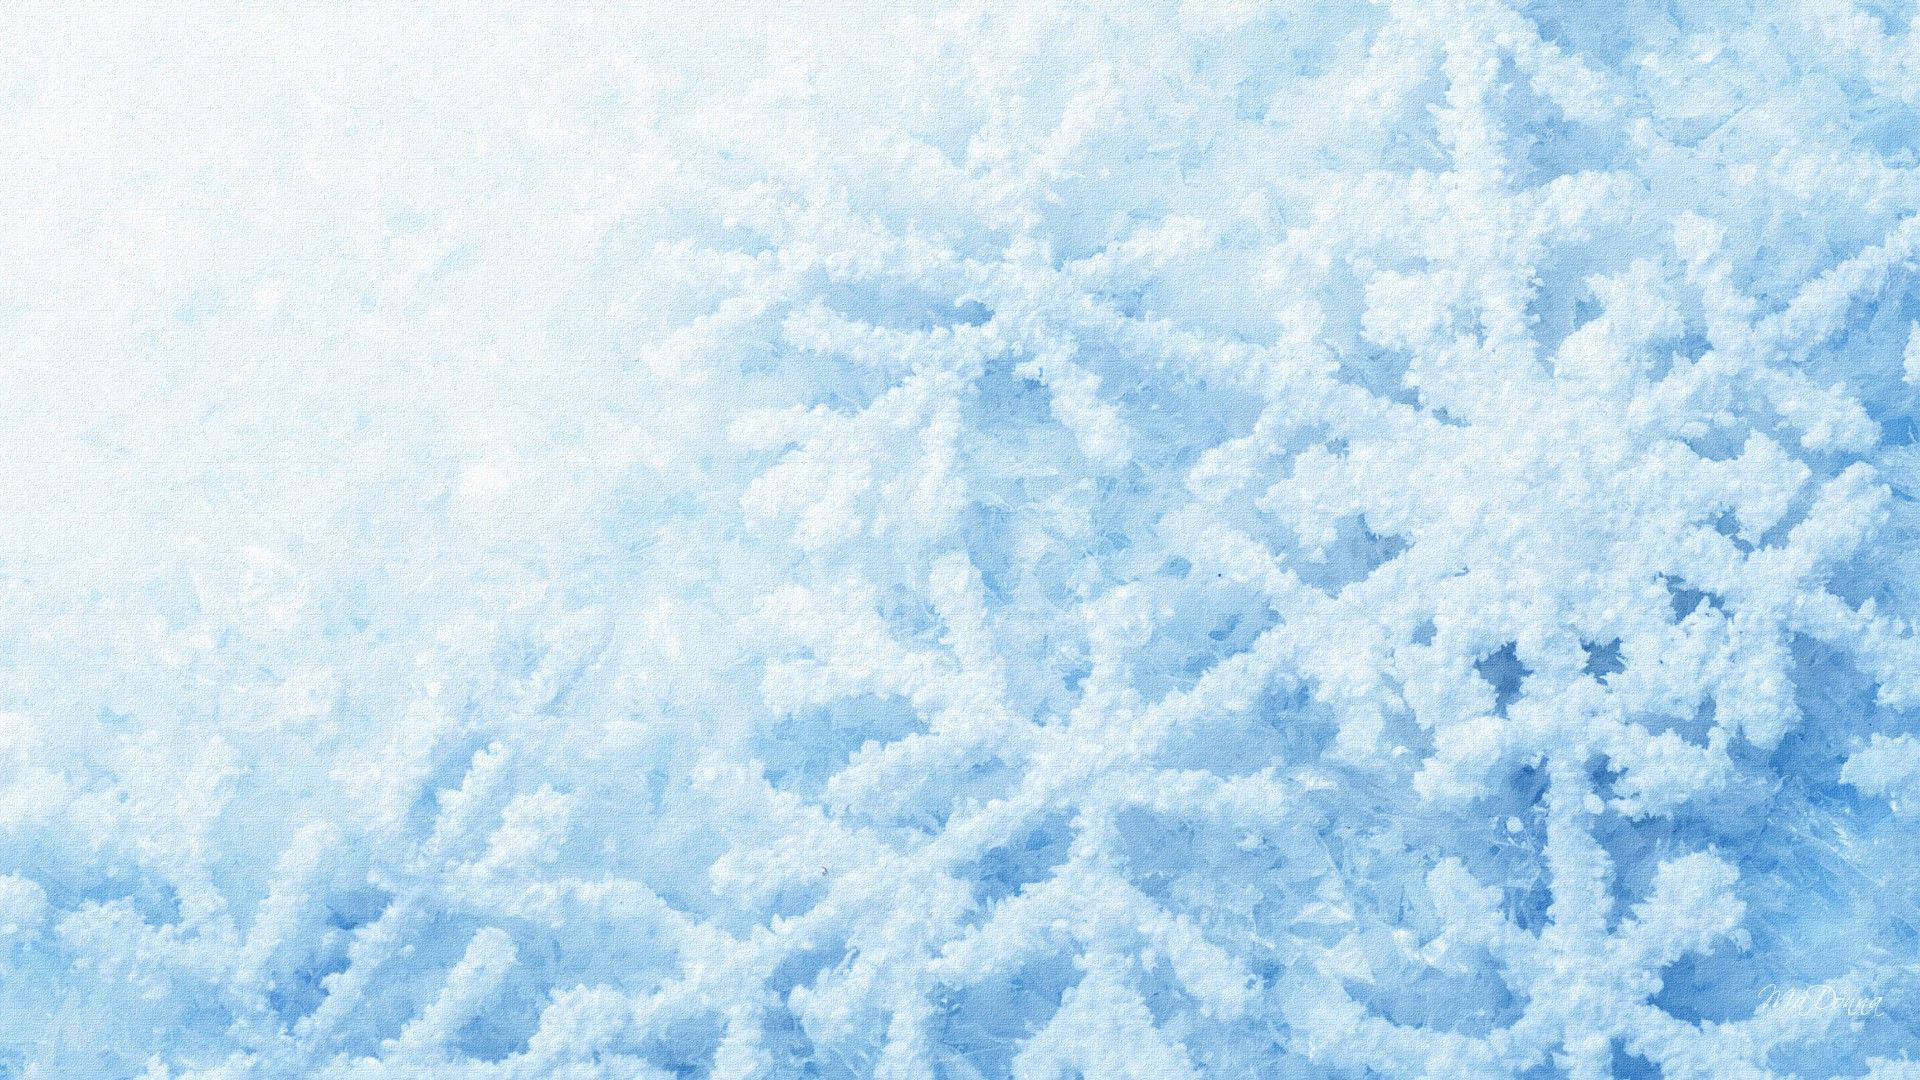 Snowflake 1920X1080 Wallpaper and Background Image